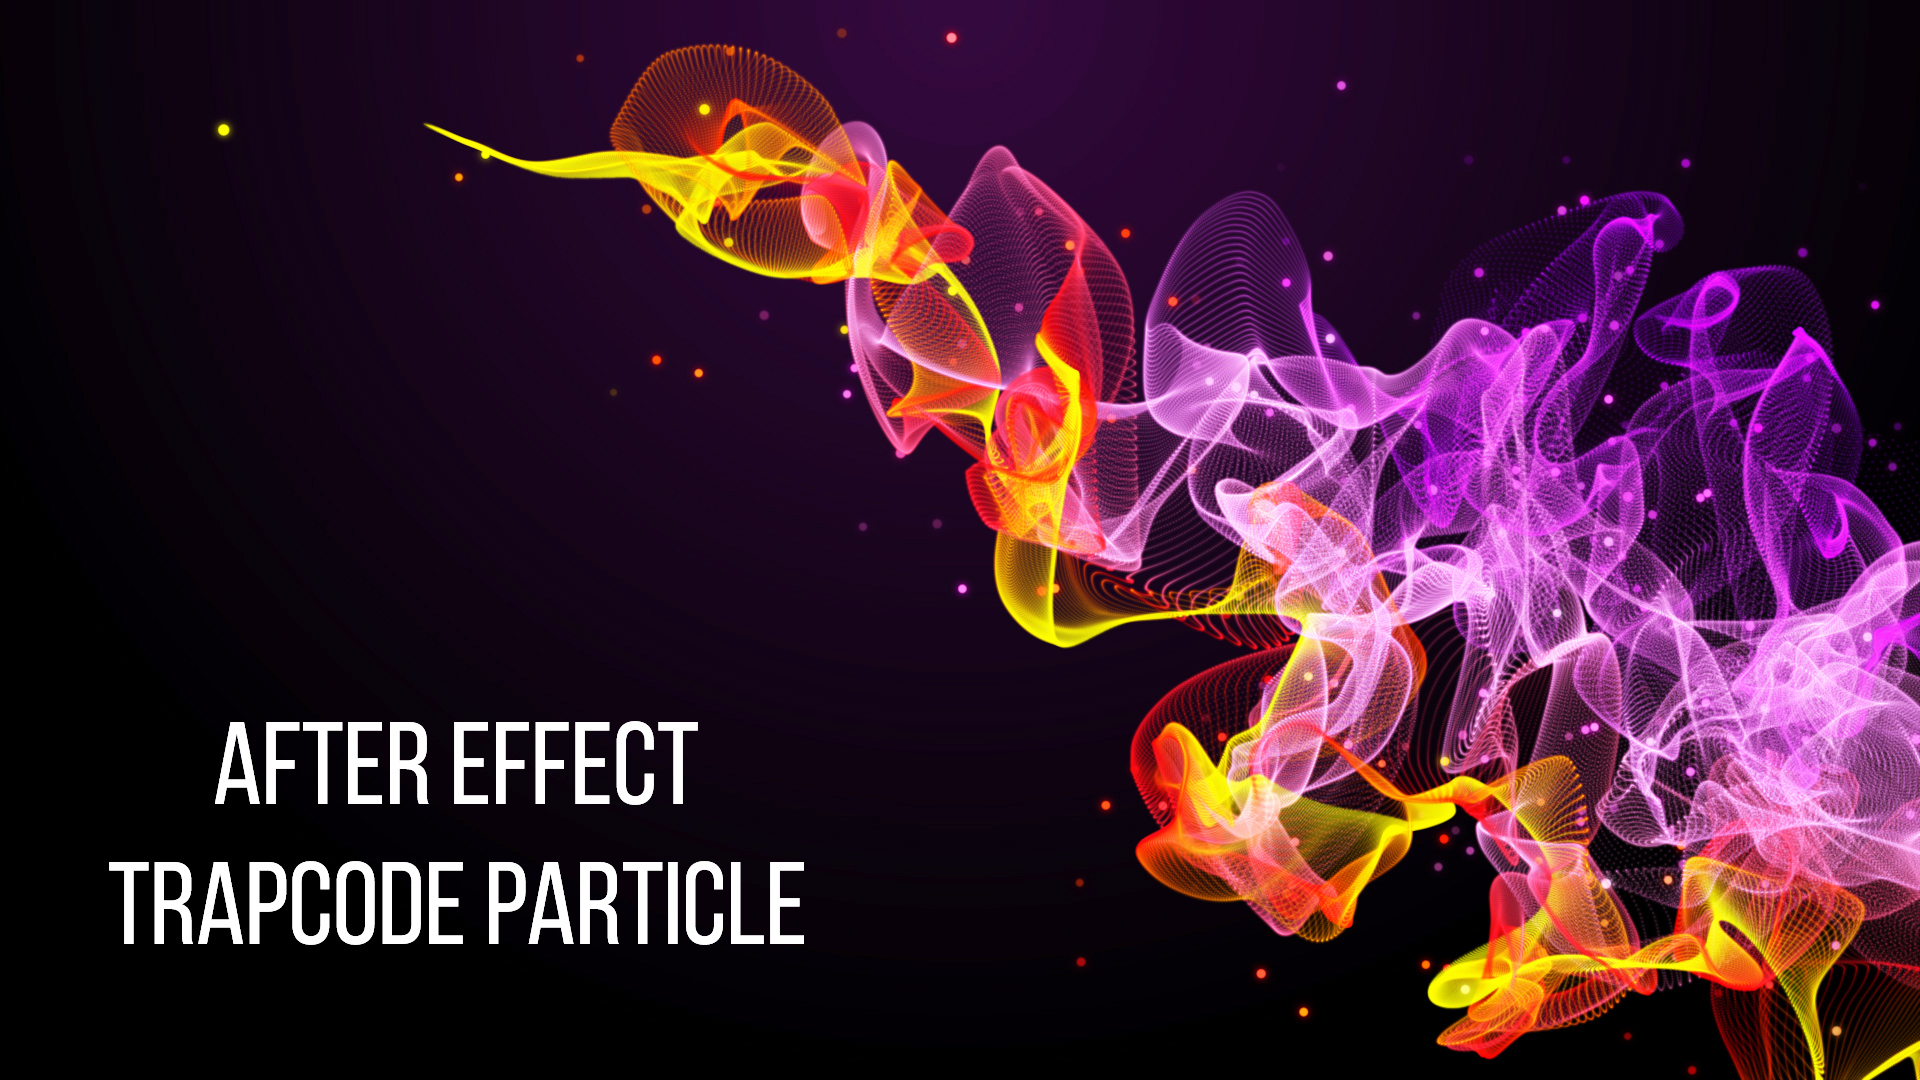 After Effect CC 2018 – Trapcode Particle Tutorial